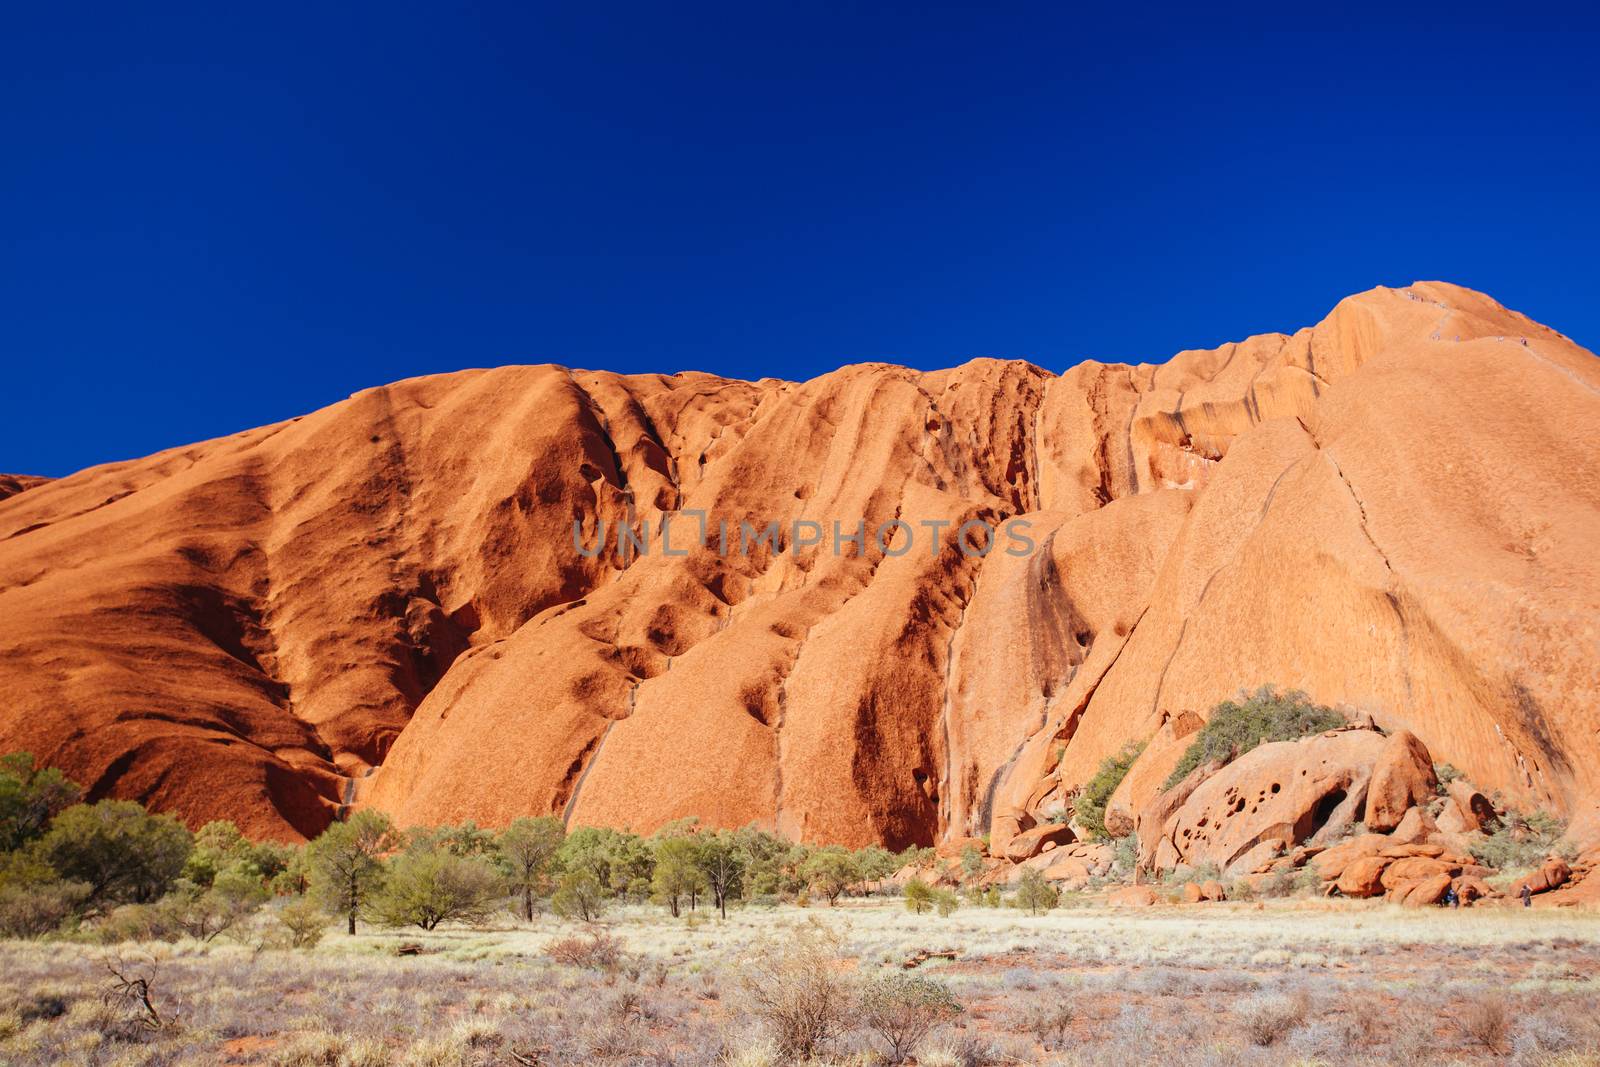 Uluru rock detail with surrounding vegetation on a clear winter's morning in the Northern Territory, Australia